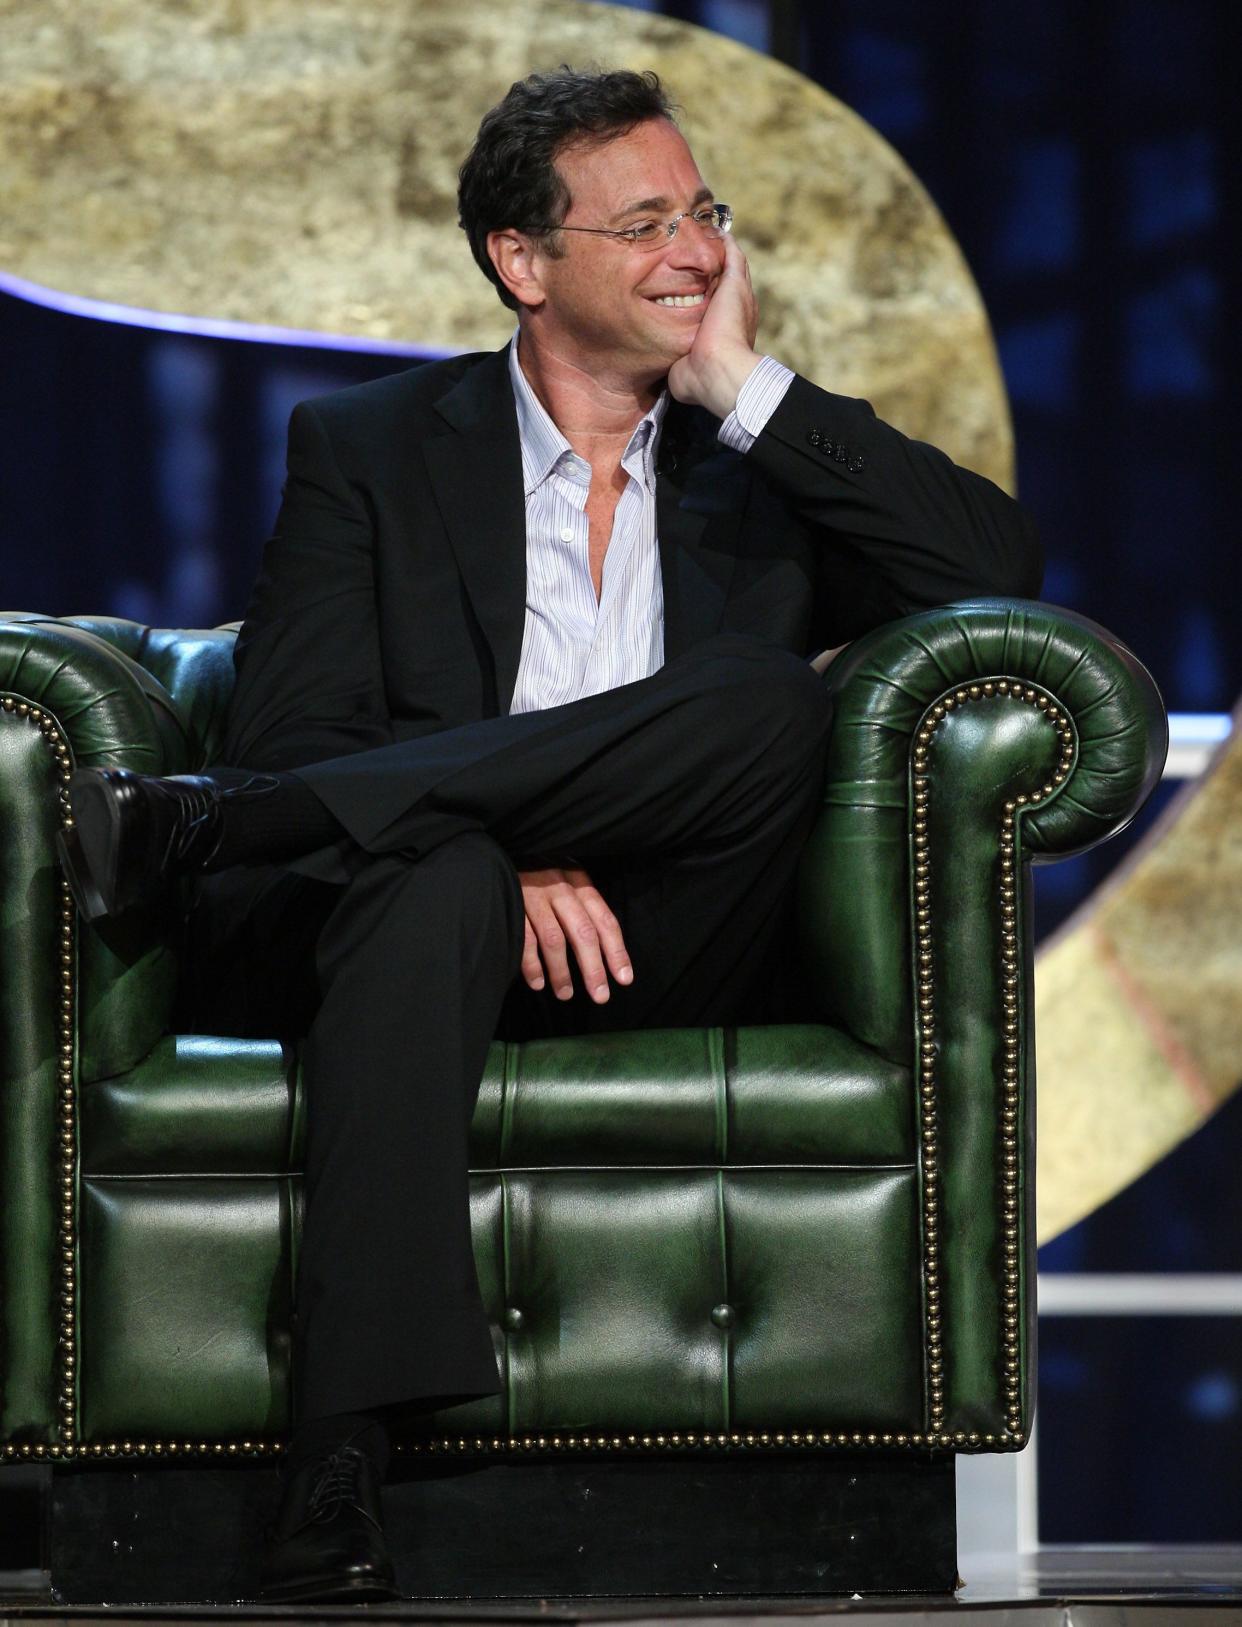 Actor/comedian Bob Saget is all smiles on stage at the "Comedy Central Roast Of Bob Saget" on the Warner Brothers Lot on Aug. 3, 2008, in Burbank, Calif.